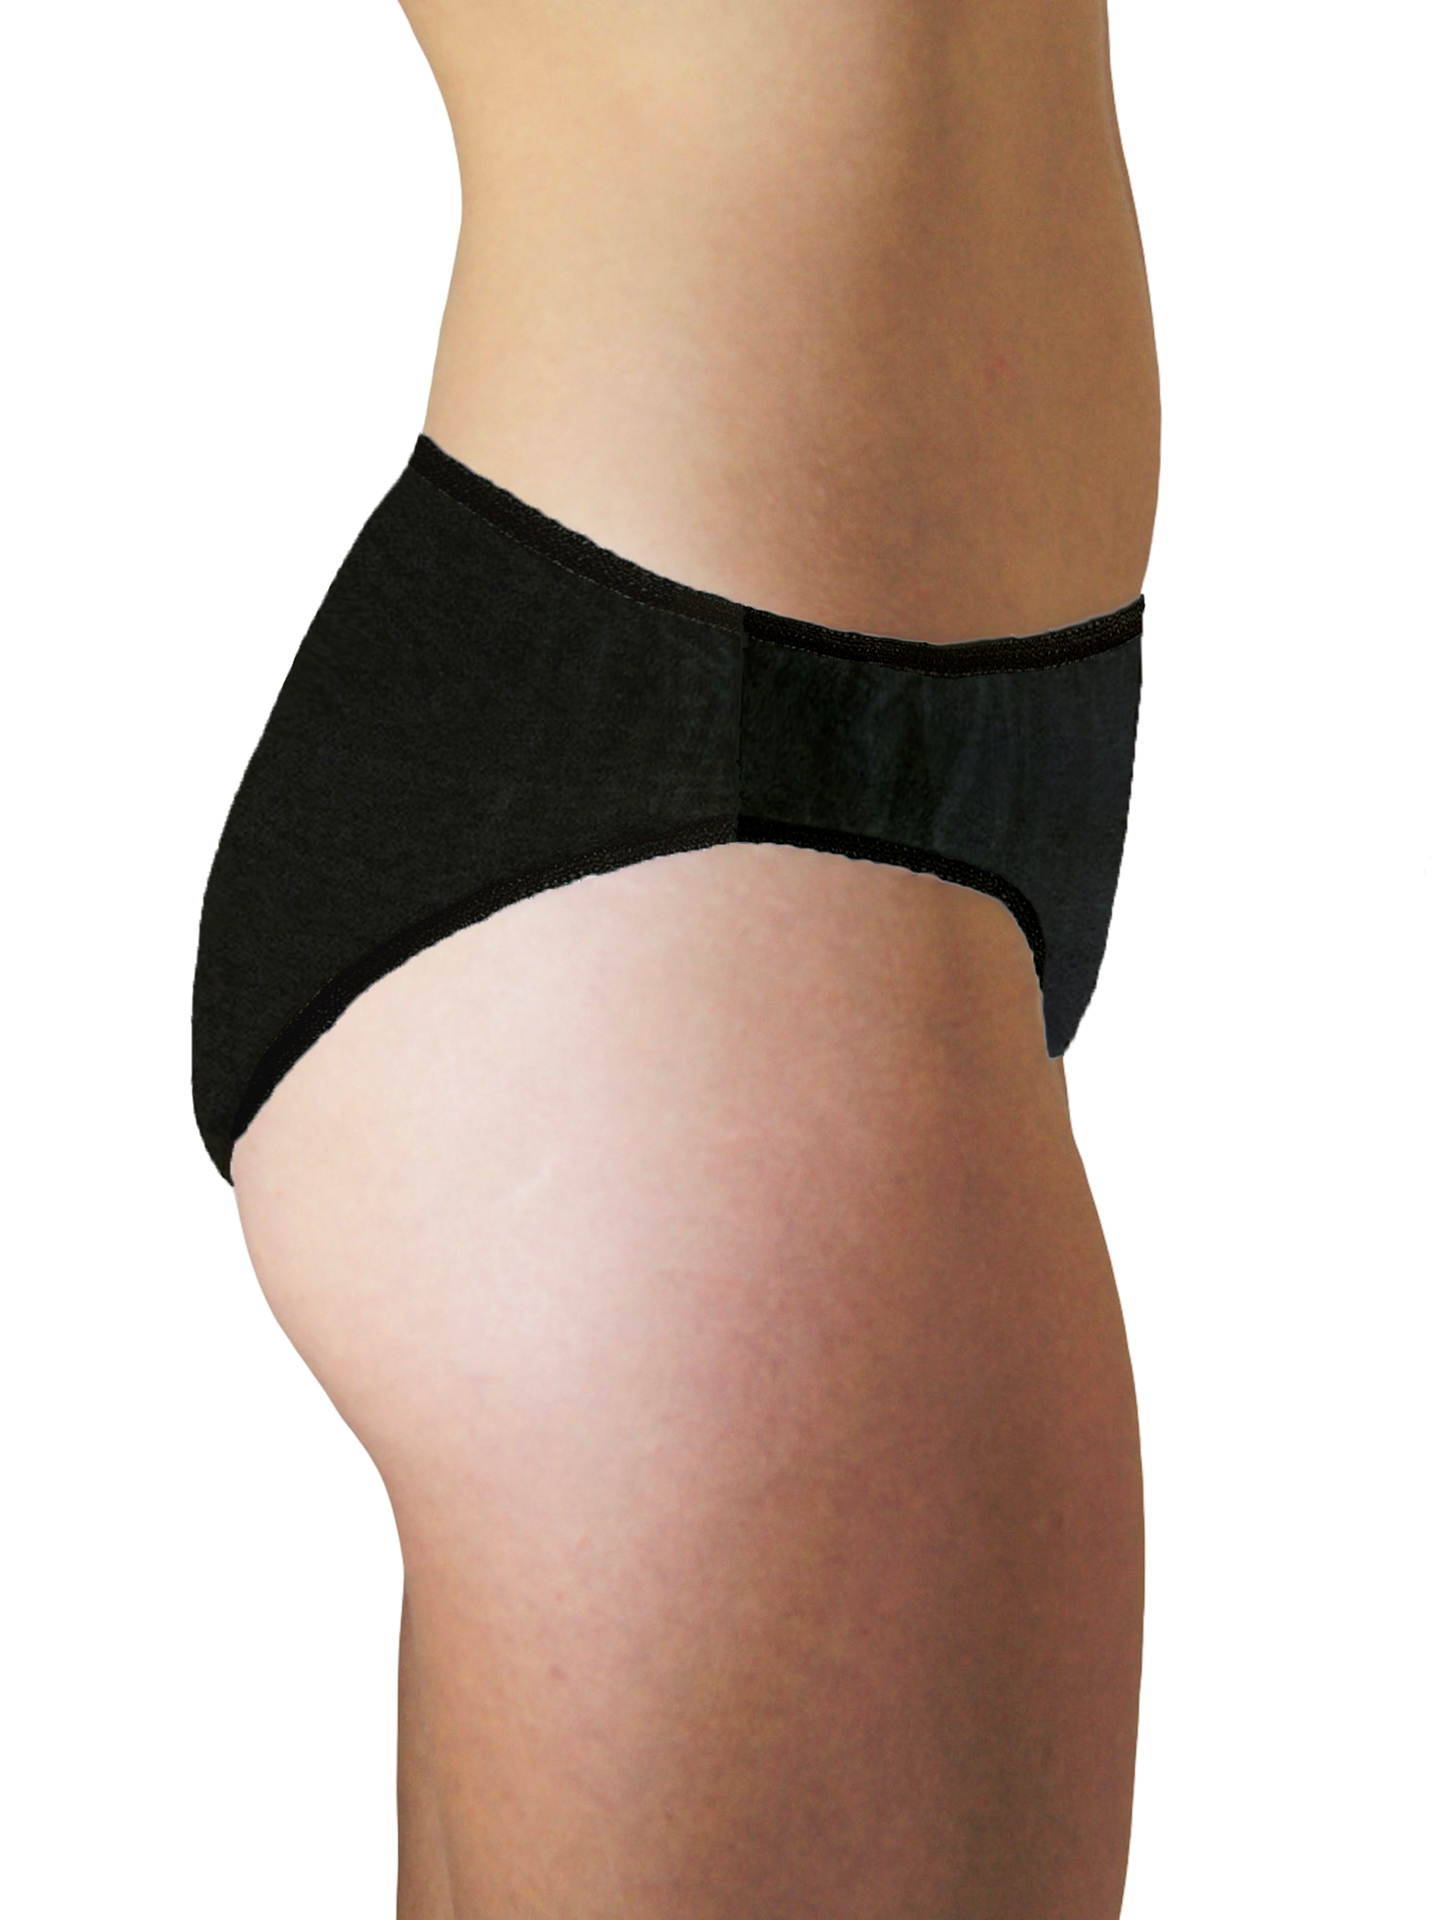 White And Black Panties DISPOSABLE BRIEF FOR SPA, High at Rs 3.60